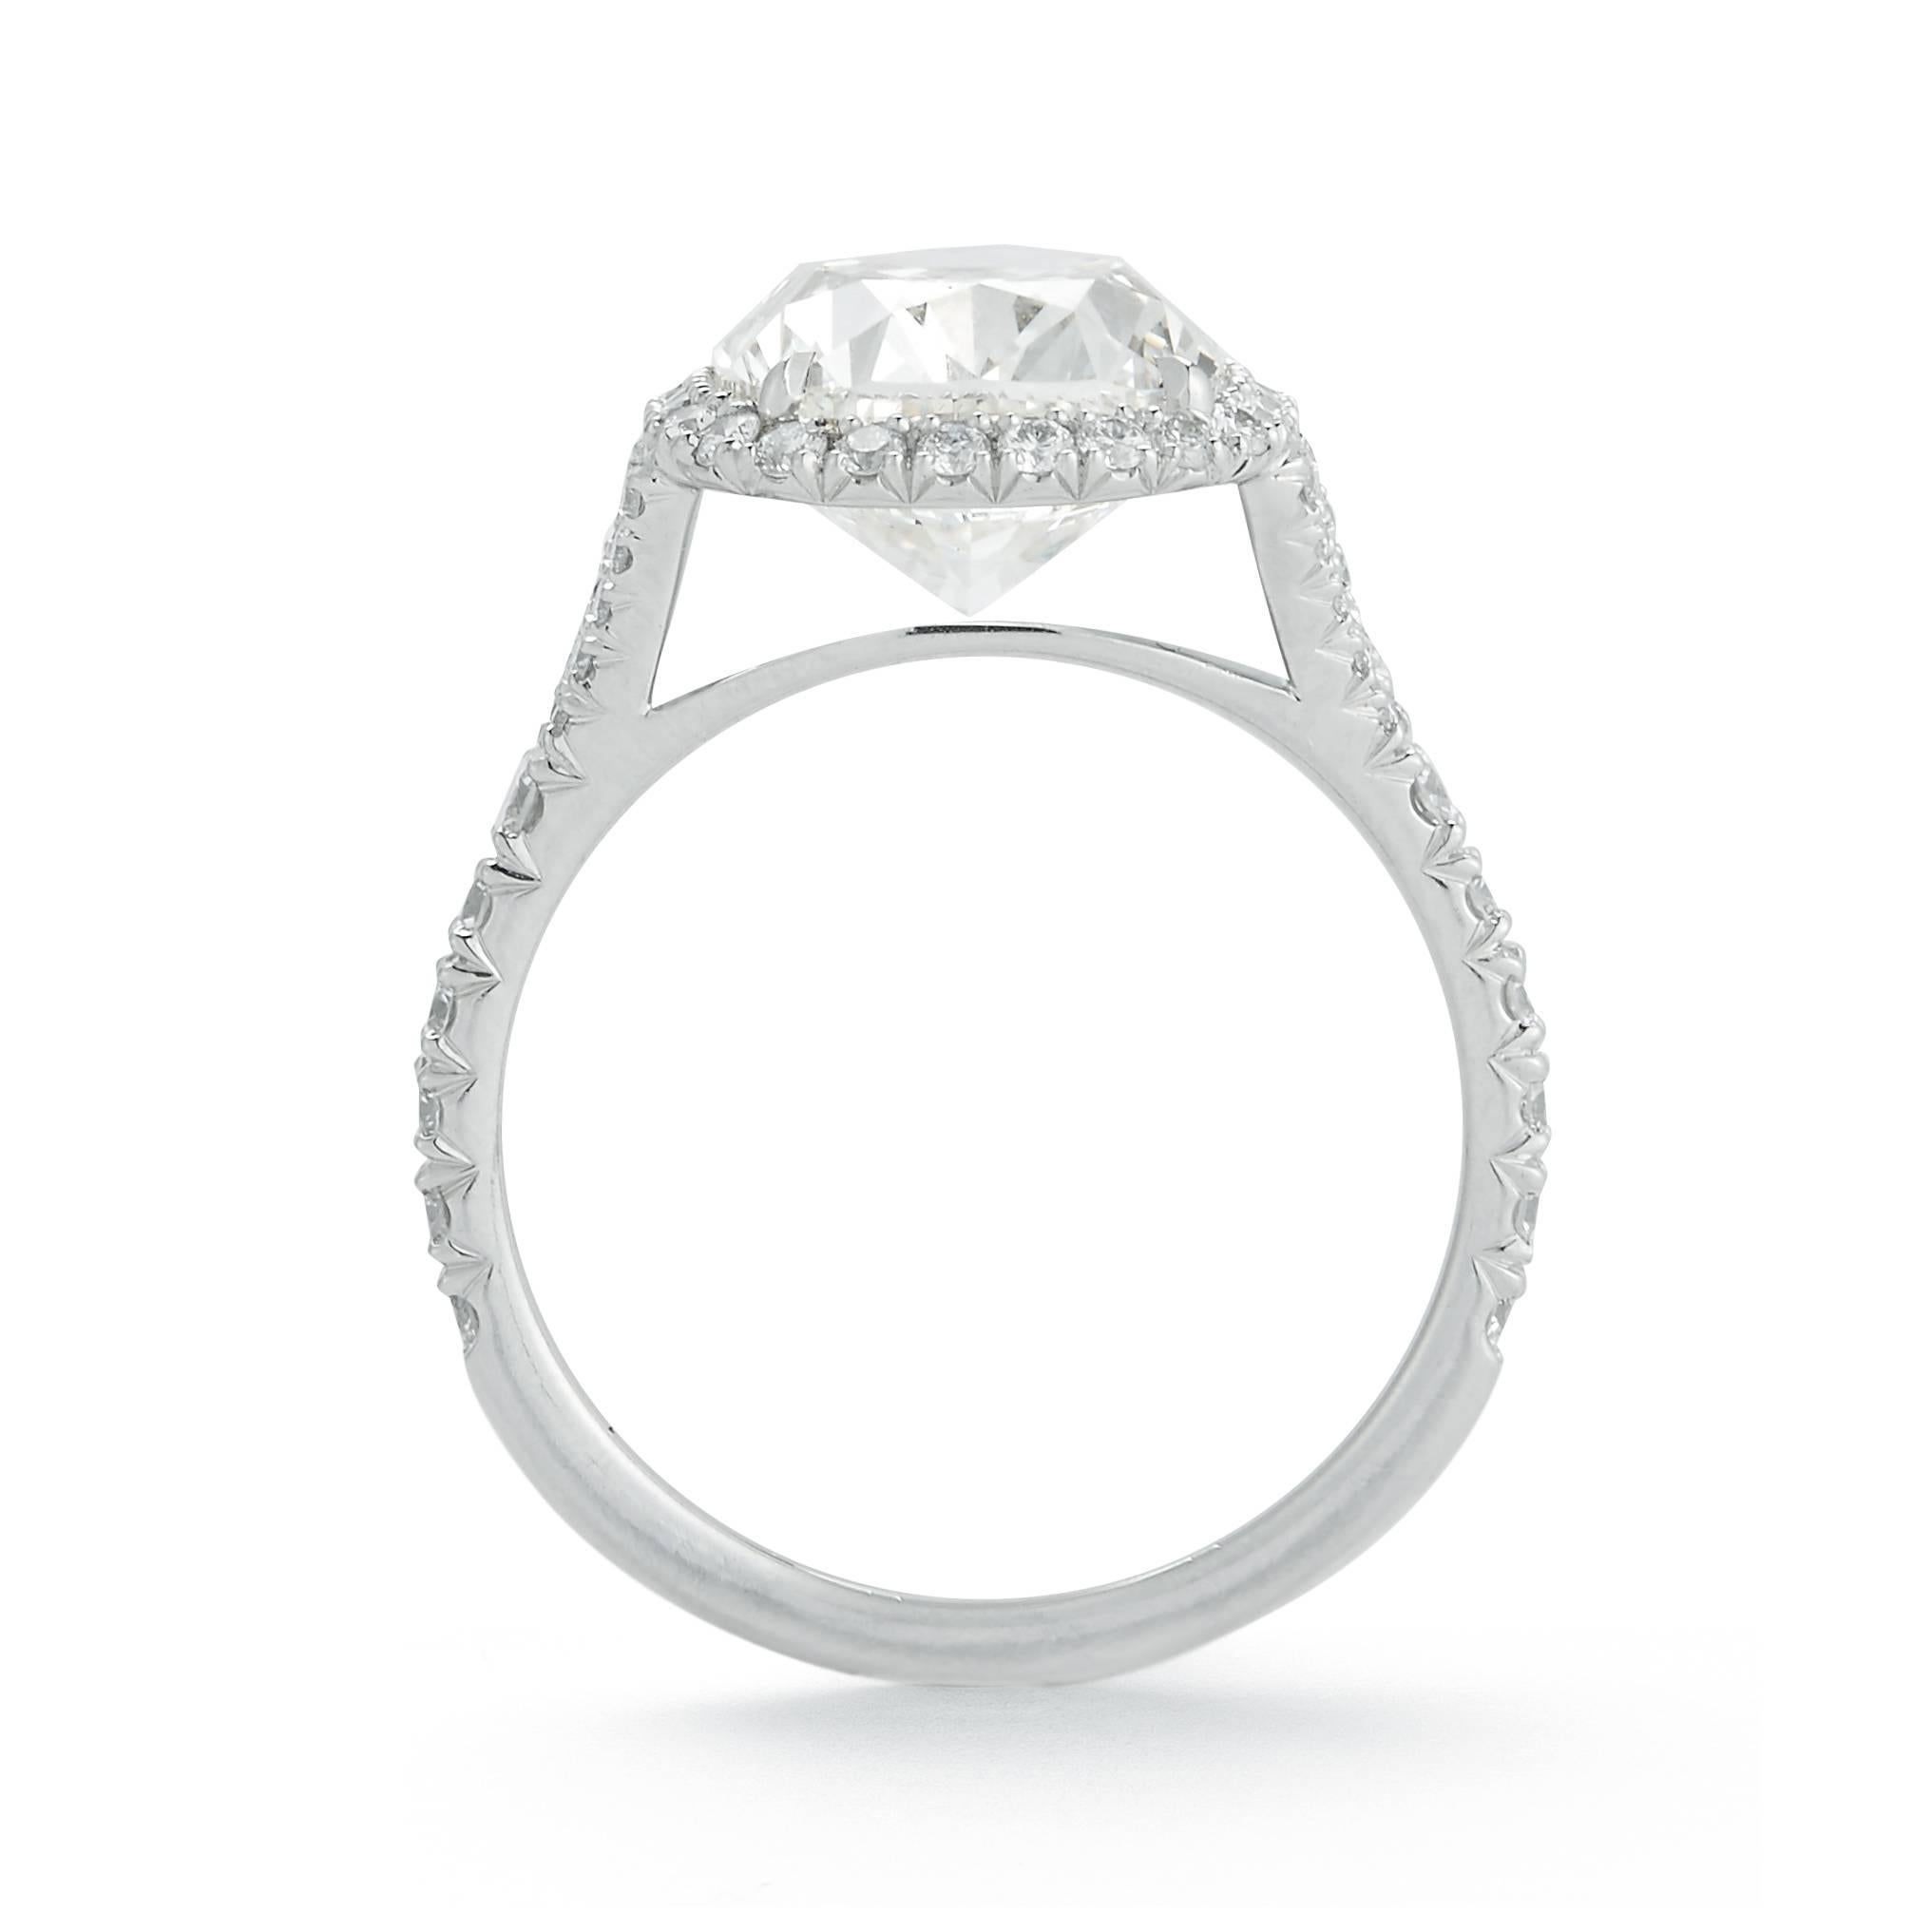 Set with a cushion-cut diamond, weighing 4.51 carats, within a diamond halo and diamond detail, mounted in platinum

Ring size 6, can be sized

Accompanied by report 2155187670 dated 17 January 2013 from the Gemological Institute of America stating